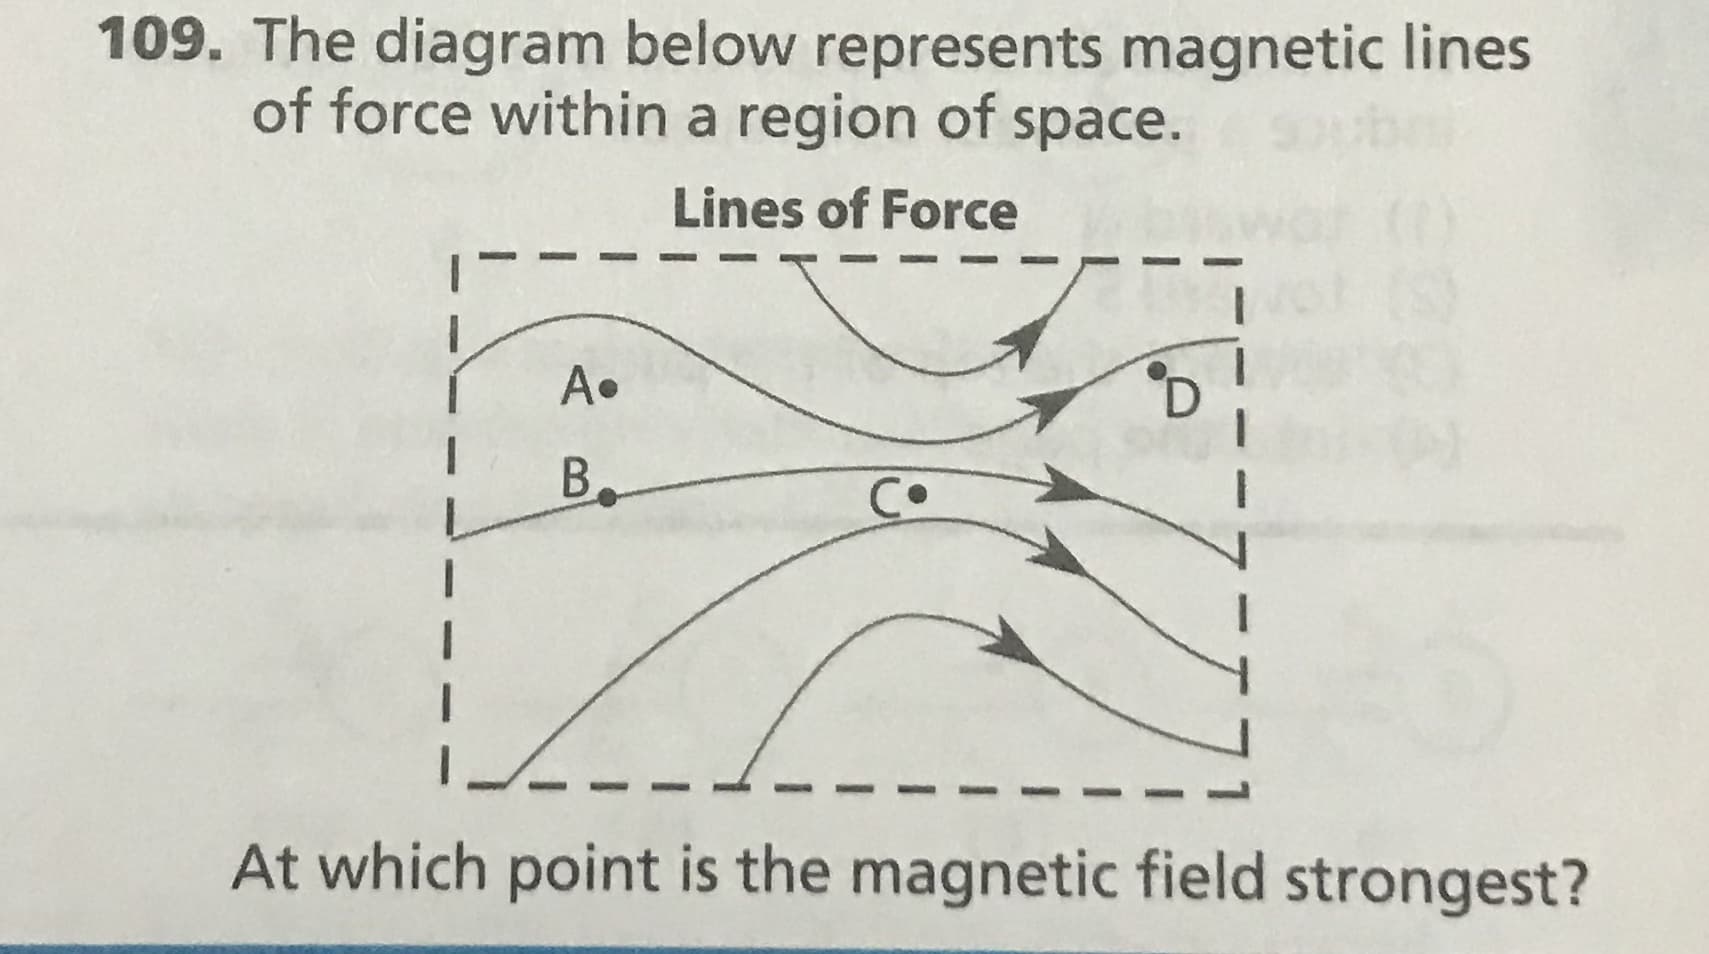 Lines of Force
A•
B.
